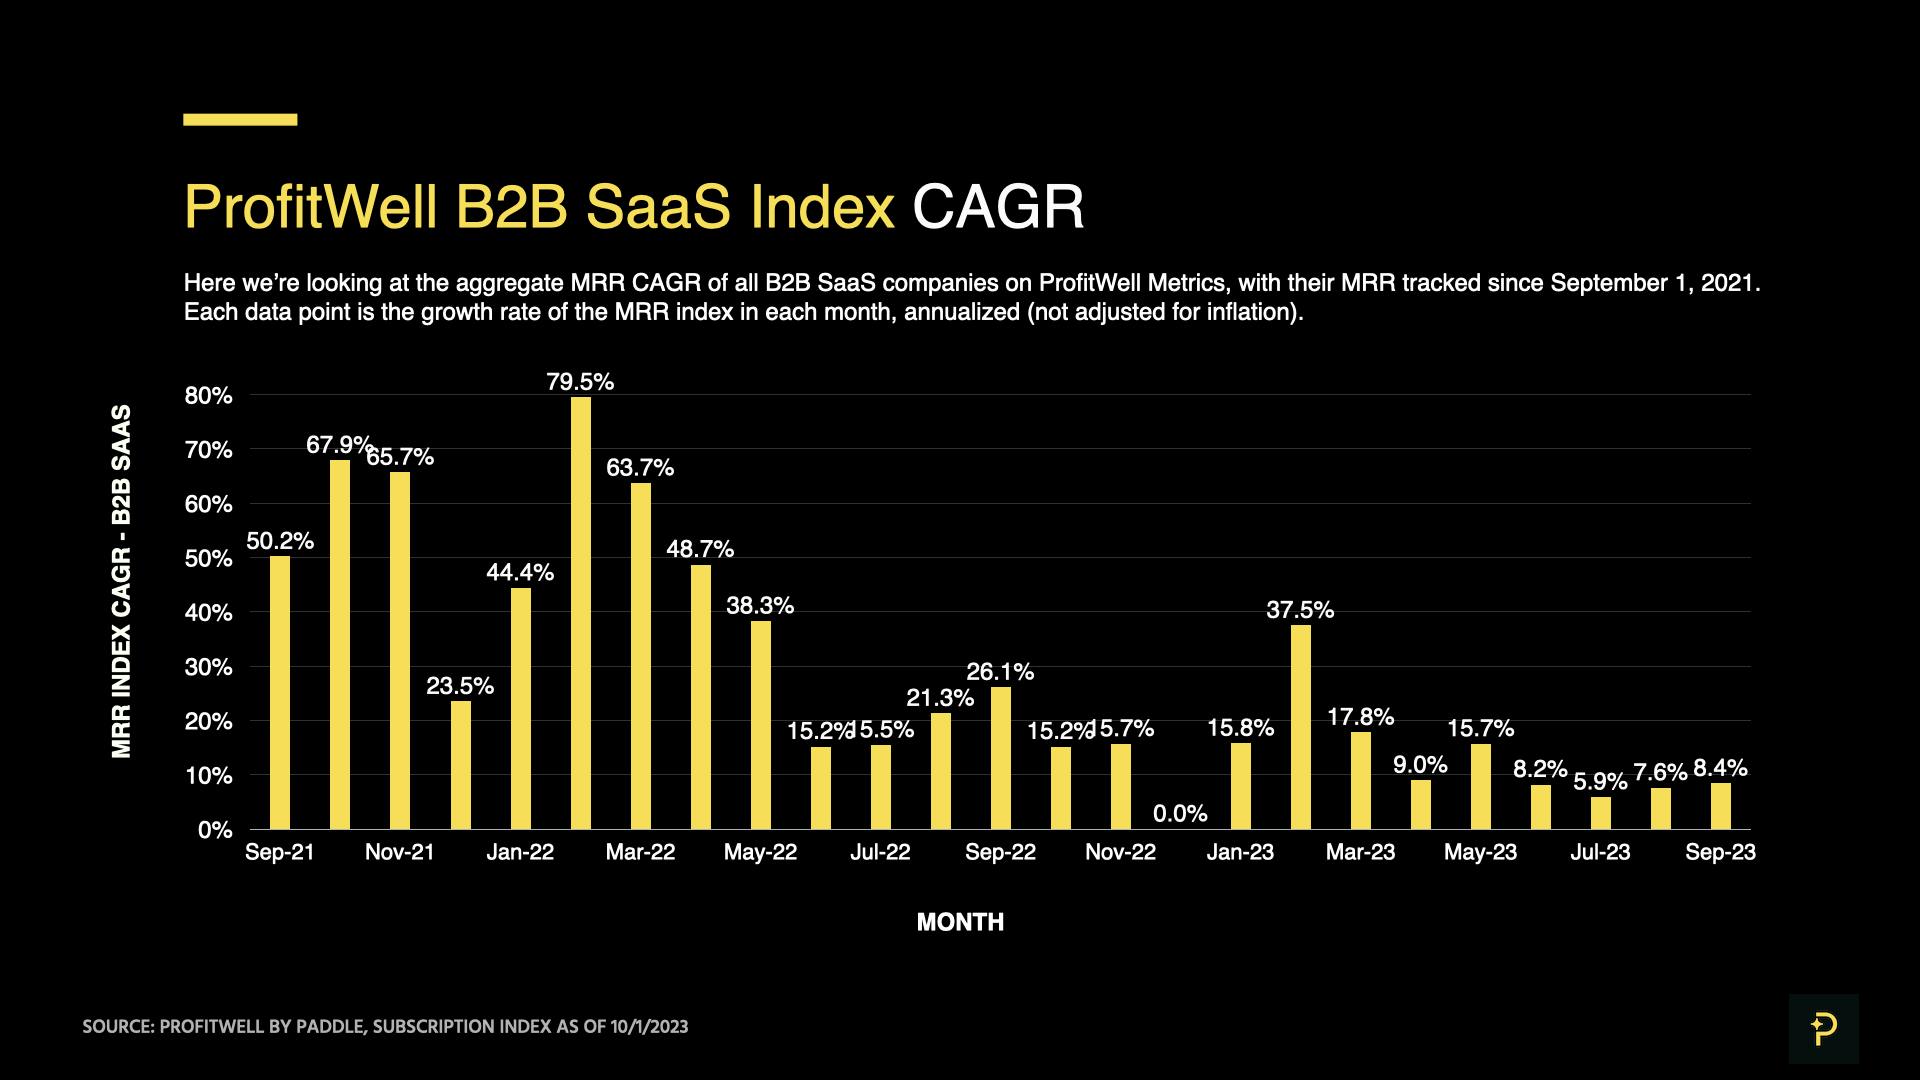 ProfitWell B2B SaaS Index as of October 1, 2023 - Compound Annual Growth Rate in MRR, Monthly